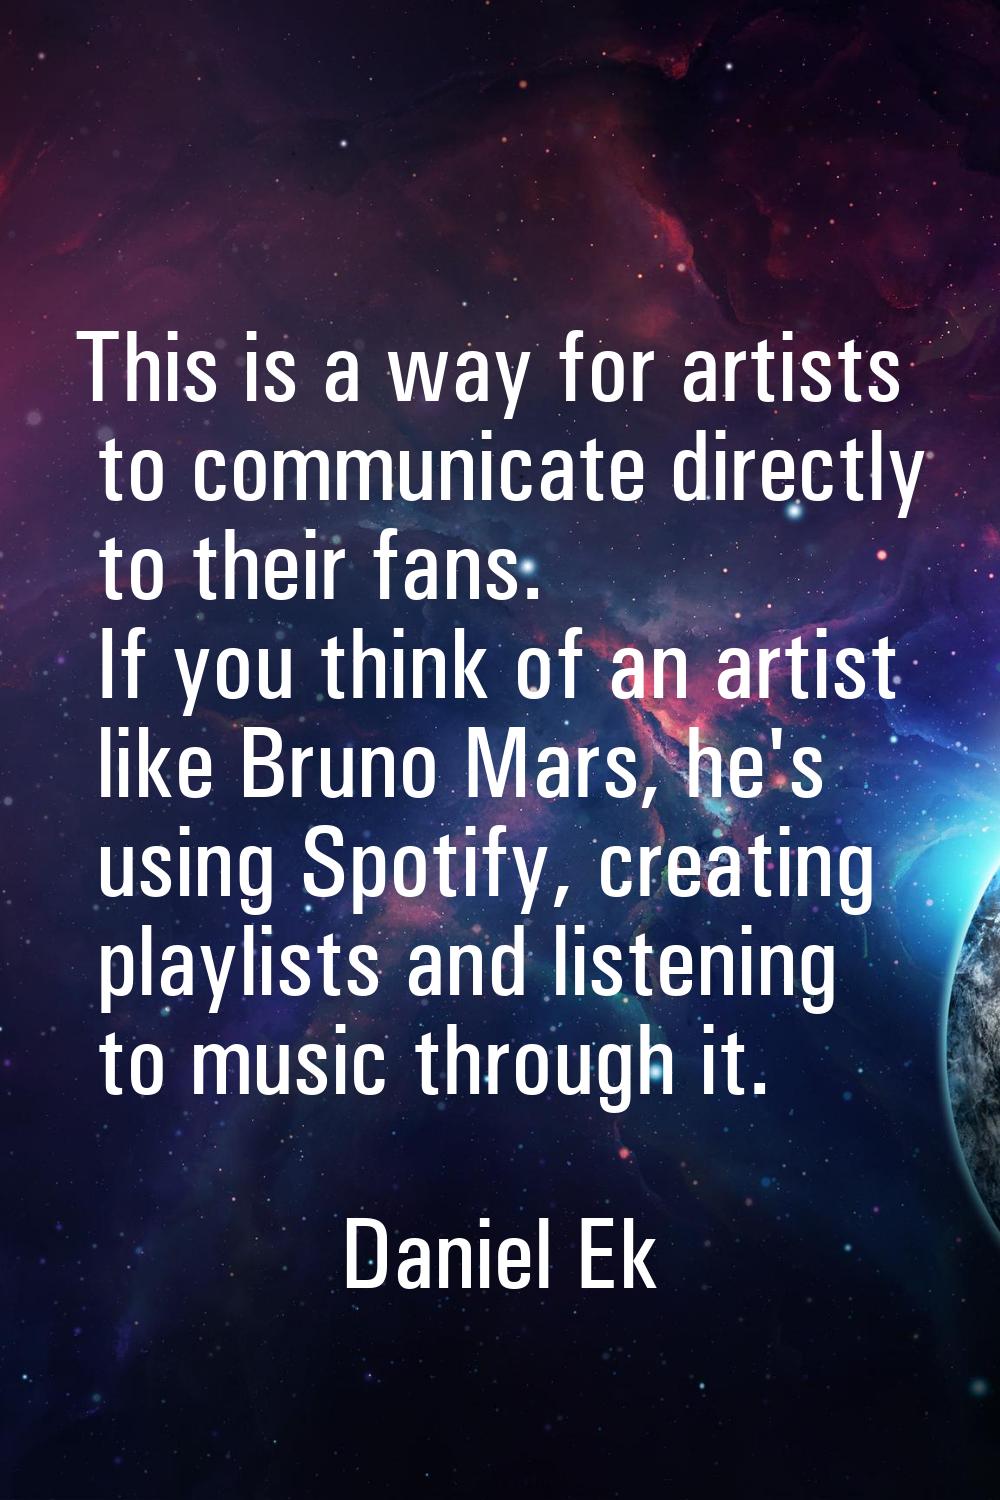 This is a way for artists to communicate directly to their fans. If you think of an artist like Bru